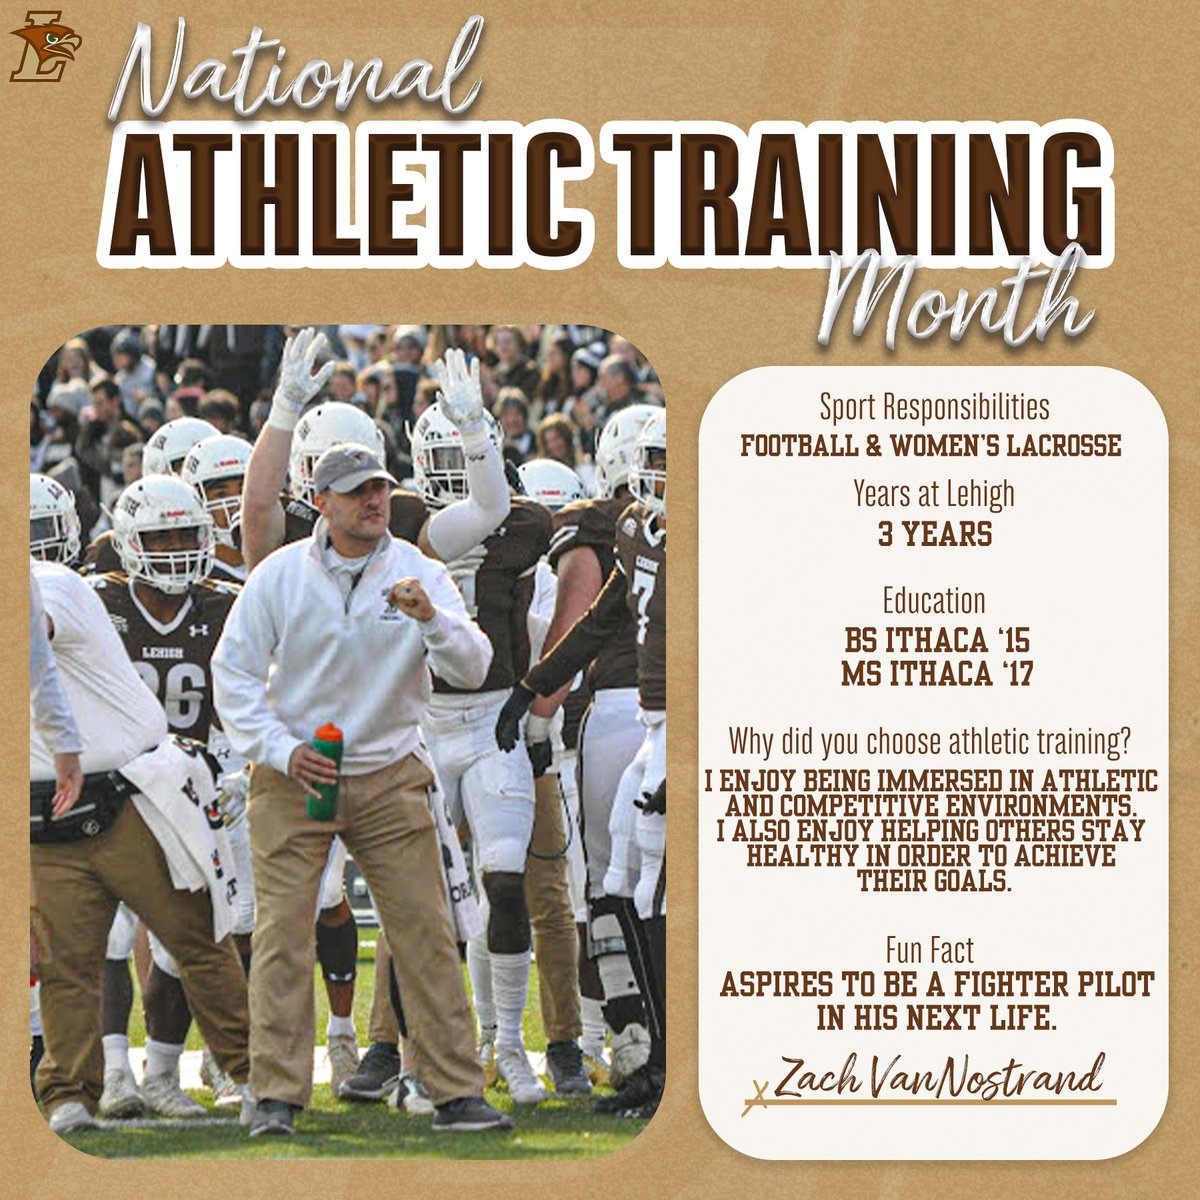 During National Athletic Training Month we're excited to celebrate Marco and Zach and all they do for our program! #GoLehigh #TheNest